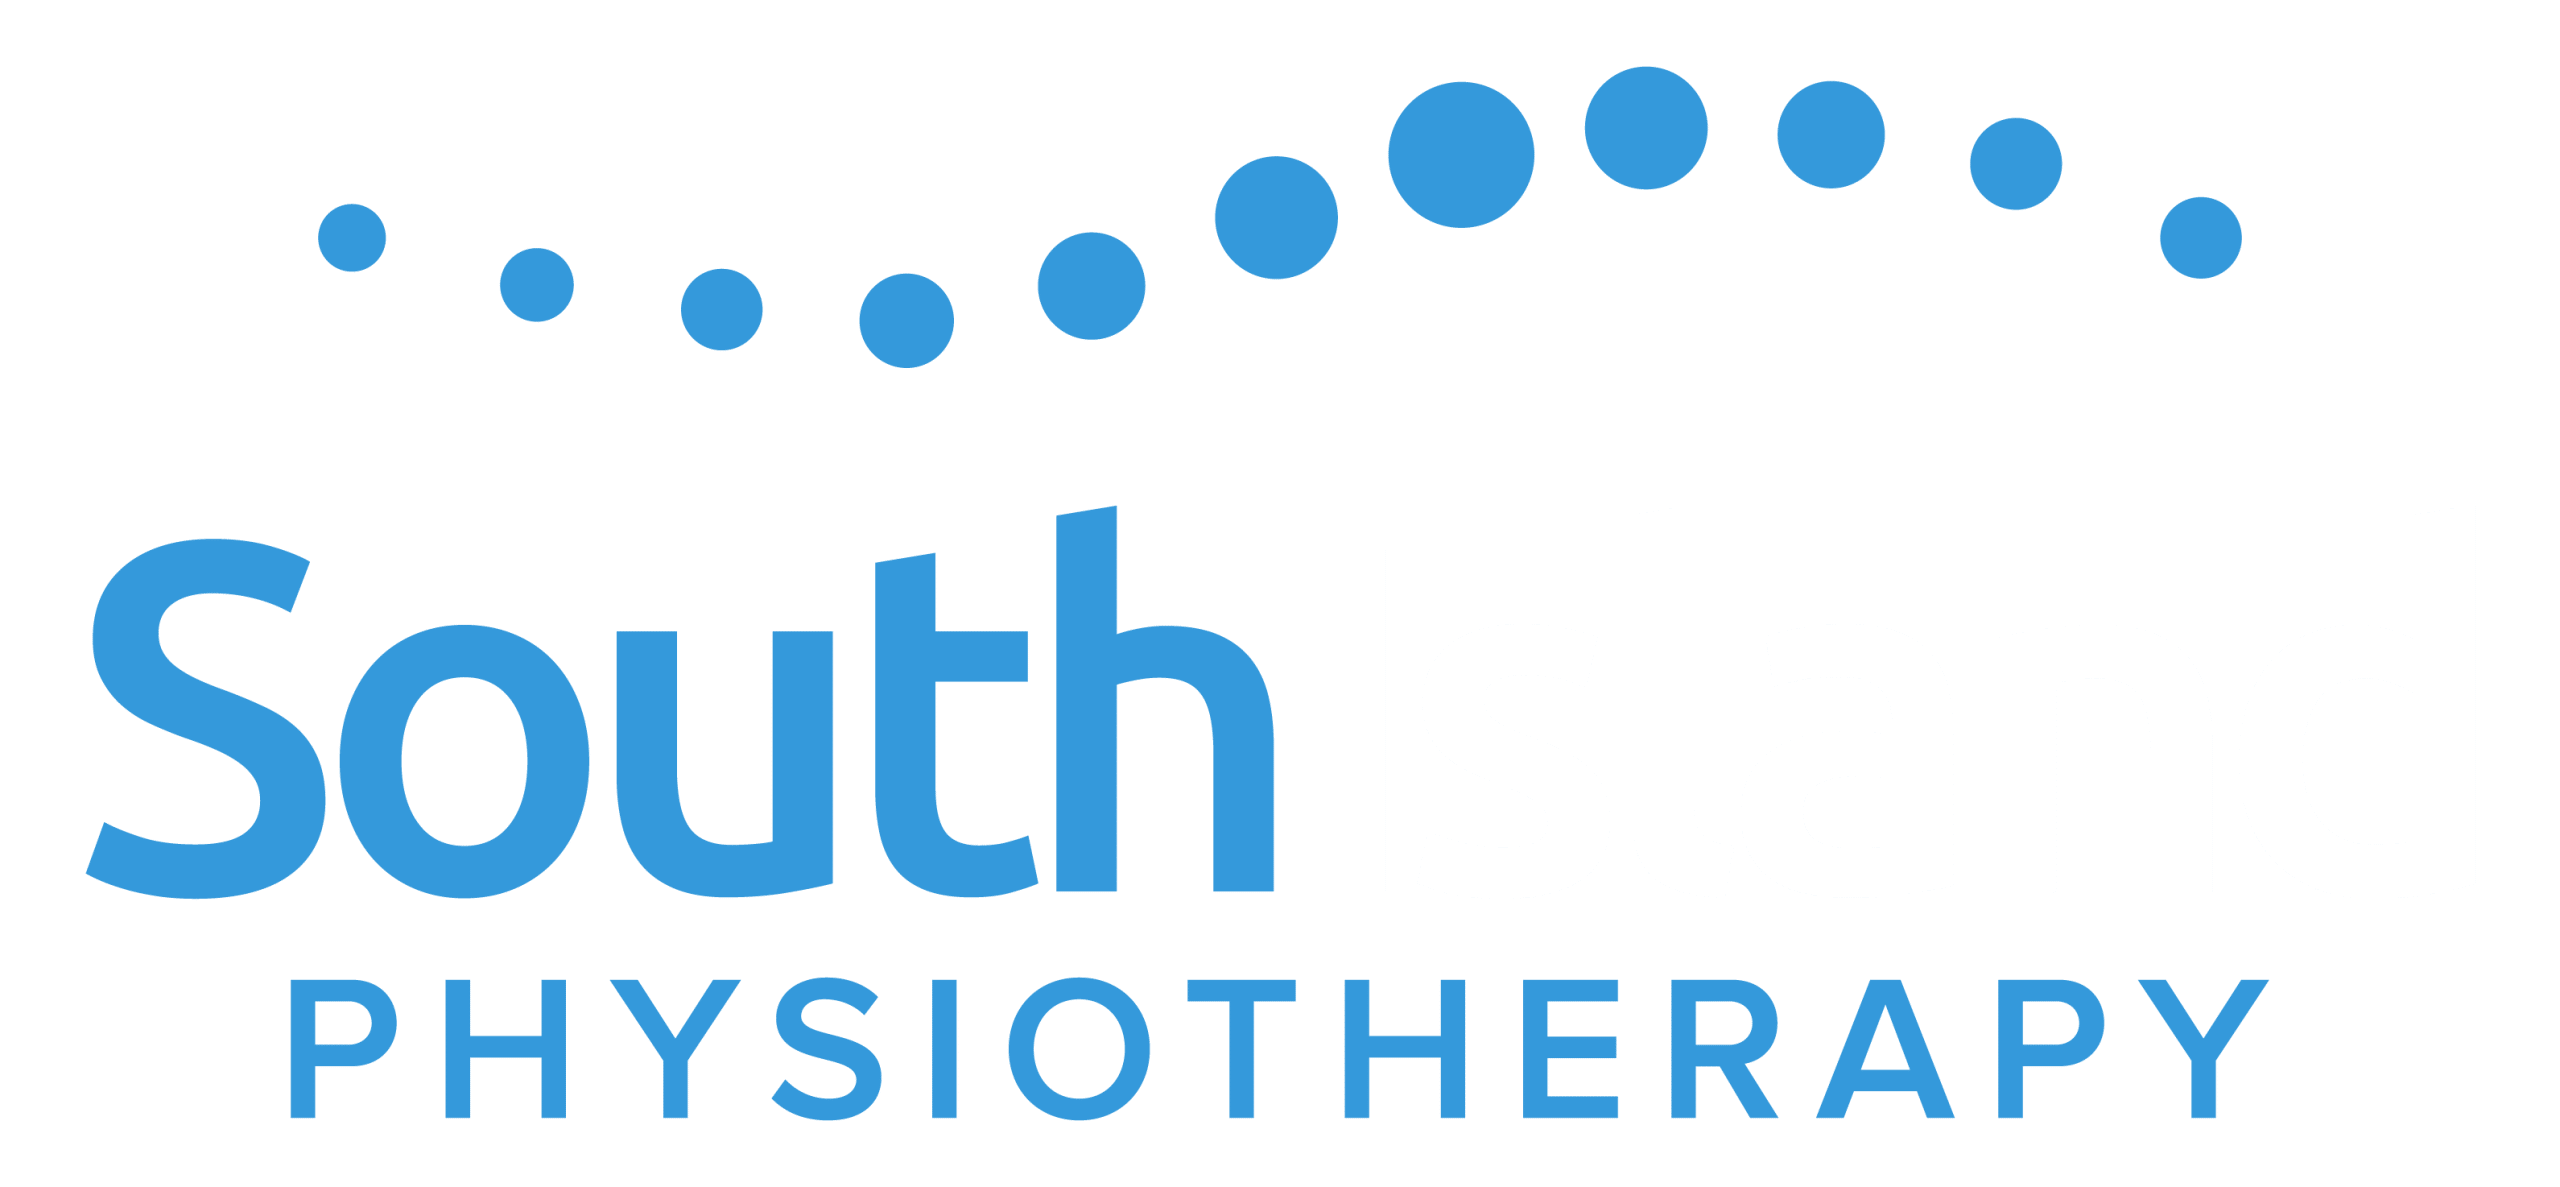 South Island Physiotherapy Logo